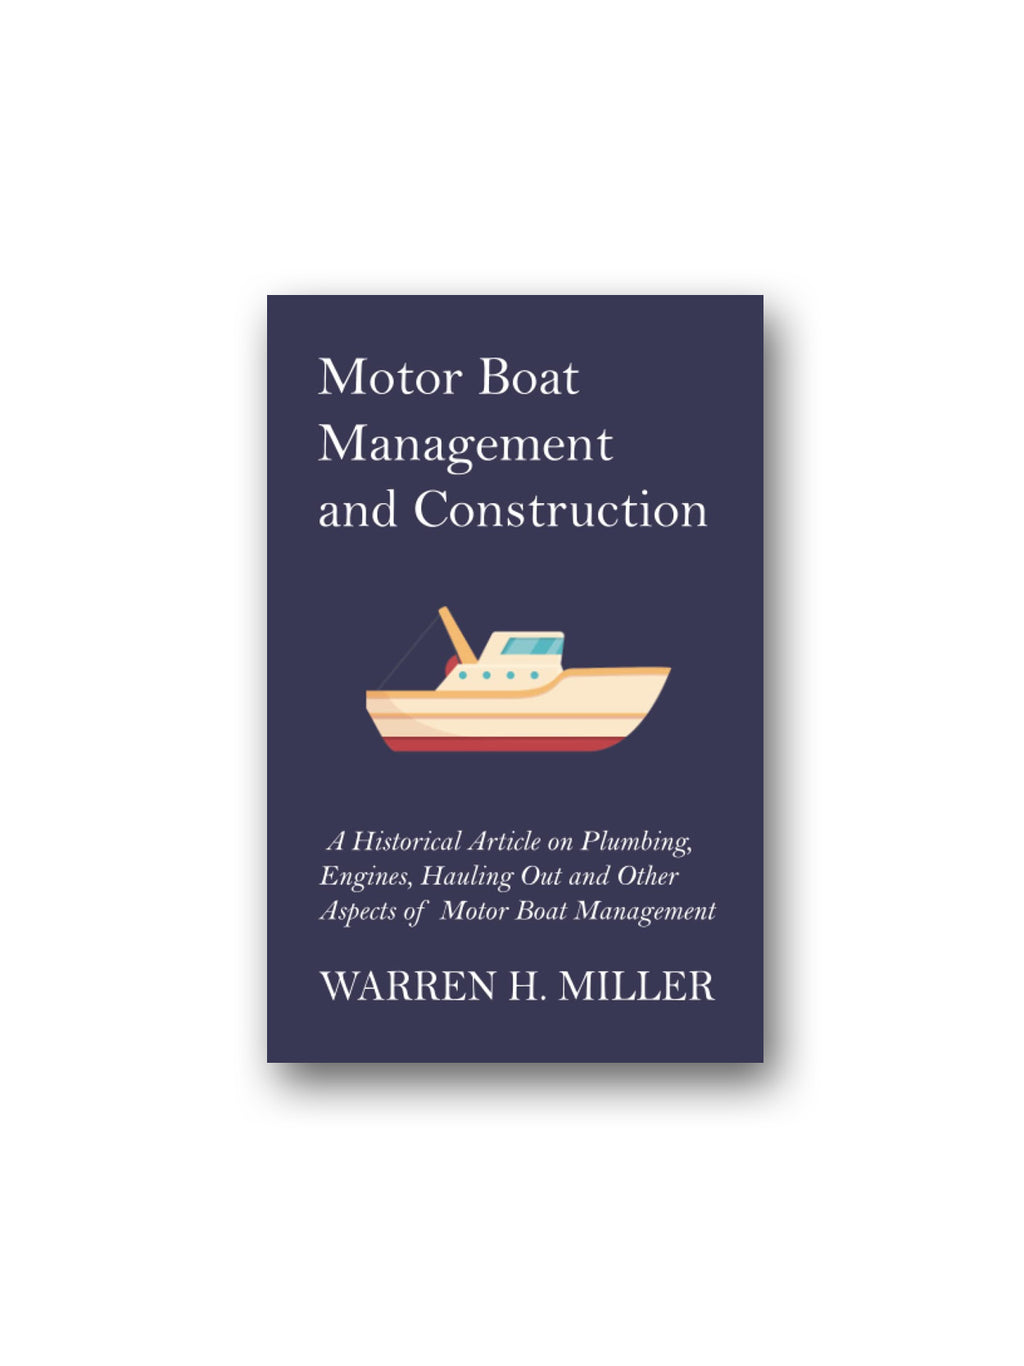 Motor Boat Management and Construction